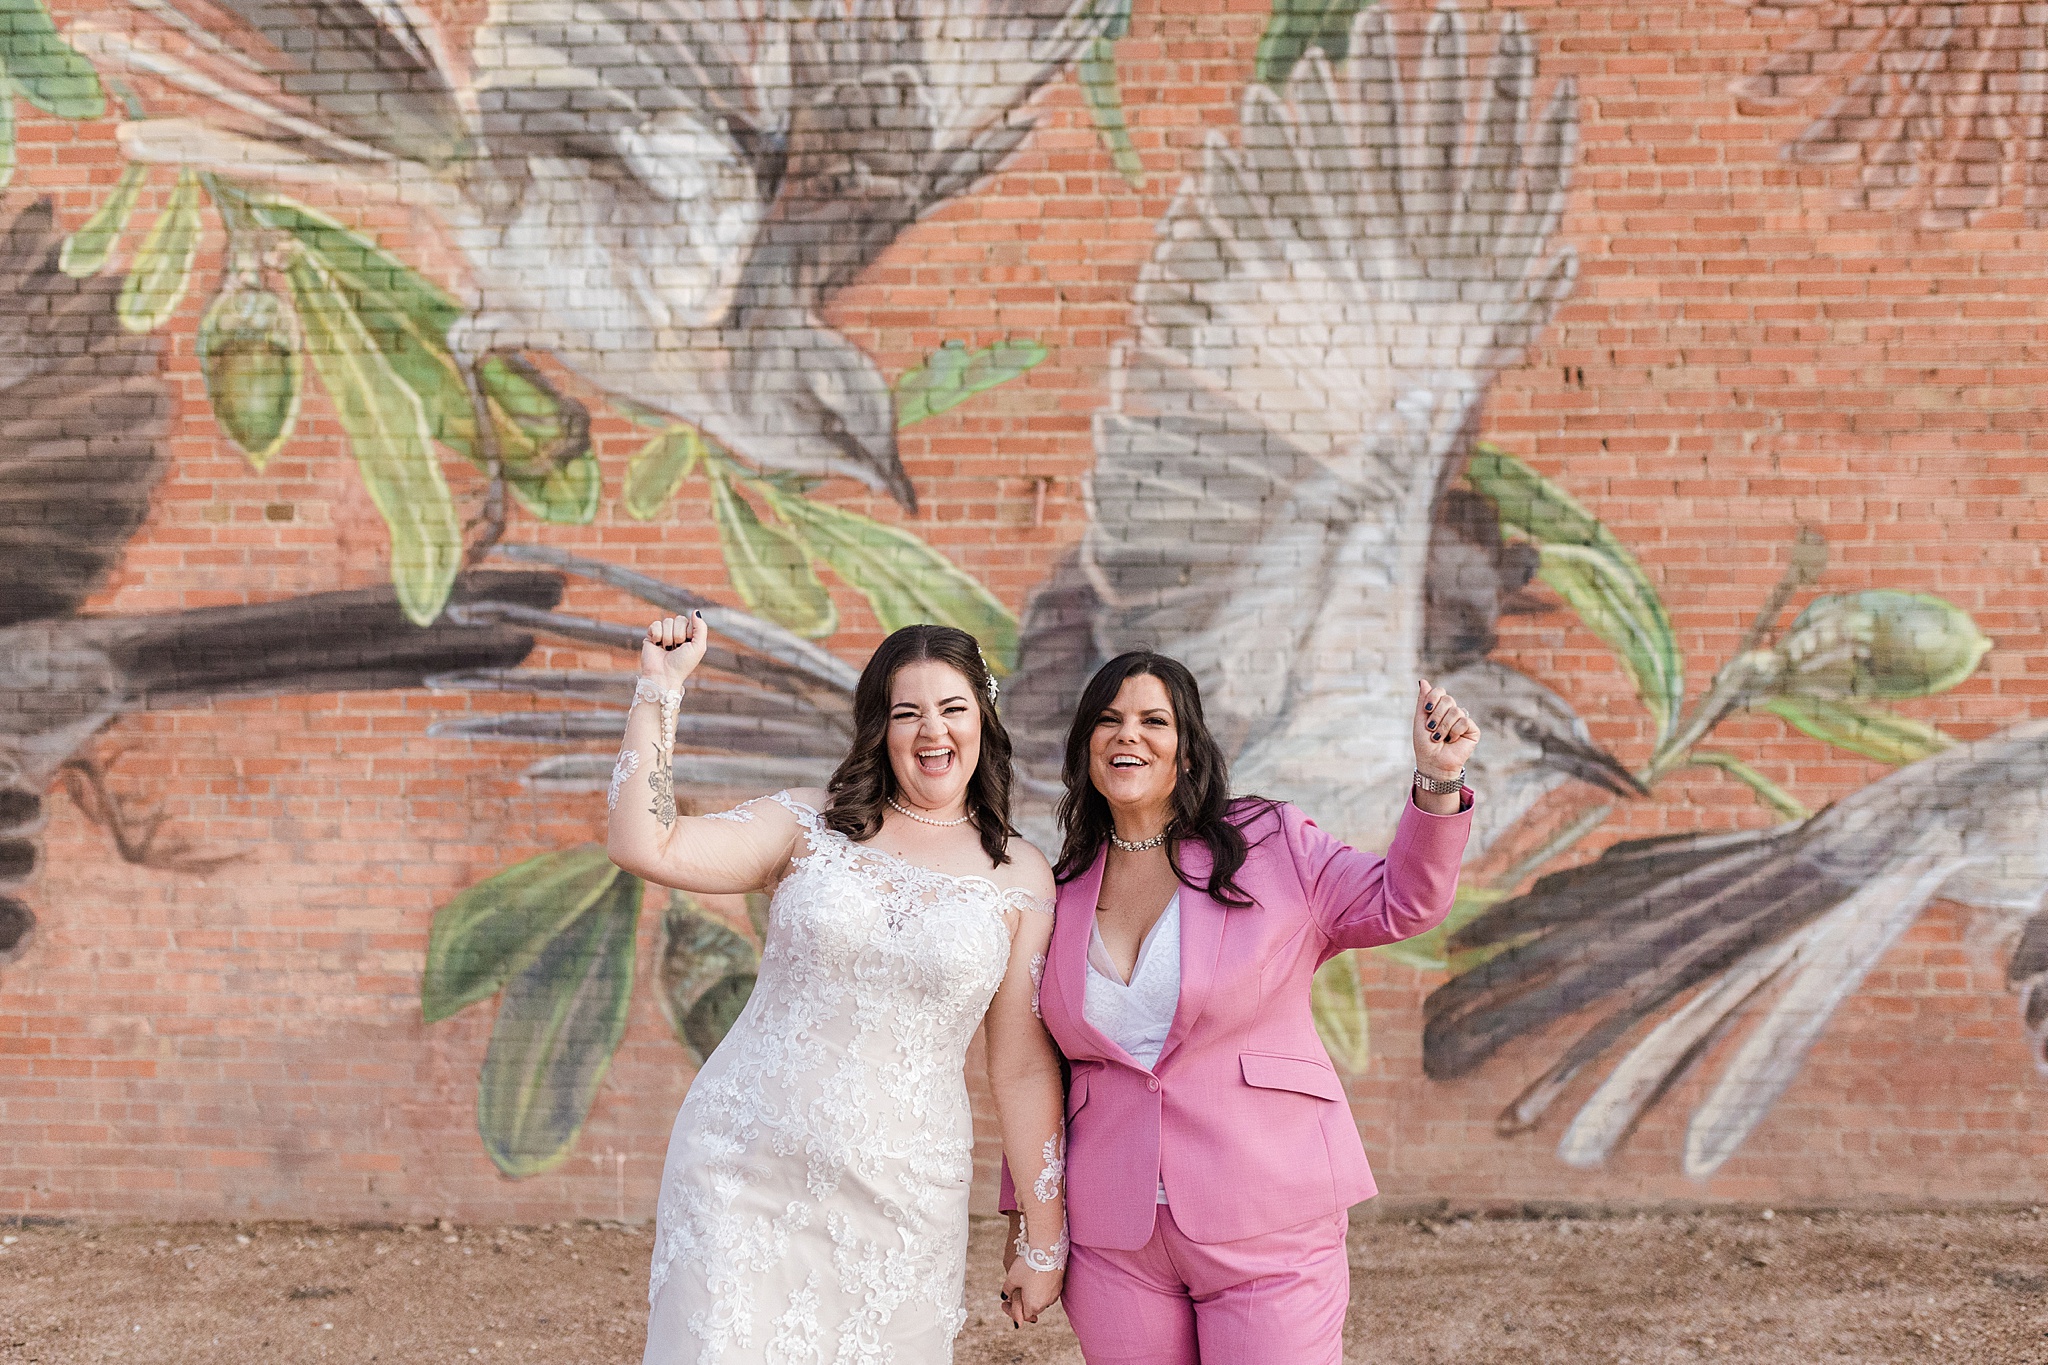 Two Caucasian brides holding hands, raising their opposite hands in celebration, and cheering in front of an outdoor painted mural at Artspace 111 in Fort Worth, Texas. One bride is wearing a detailed, floral, white wedding dress, a floral hairpiece, and a pearl necklace. The other bride is wearing a pink suit, white dress shirt, jeweled necklace, and a jeweled watch. The mural is of birds and flowers painted onto red brick.